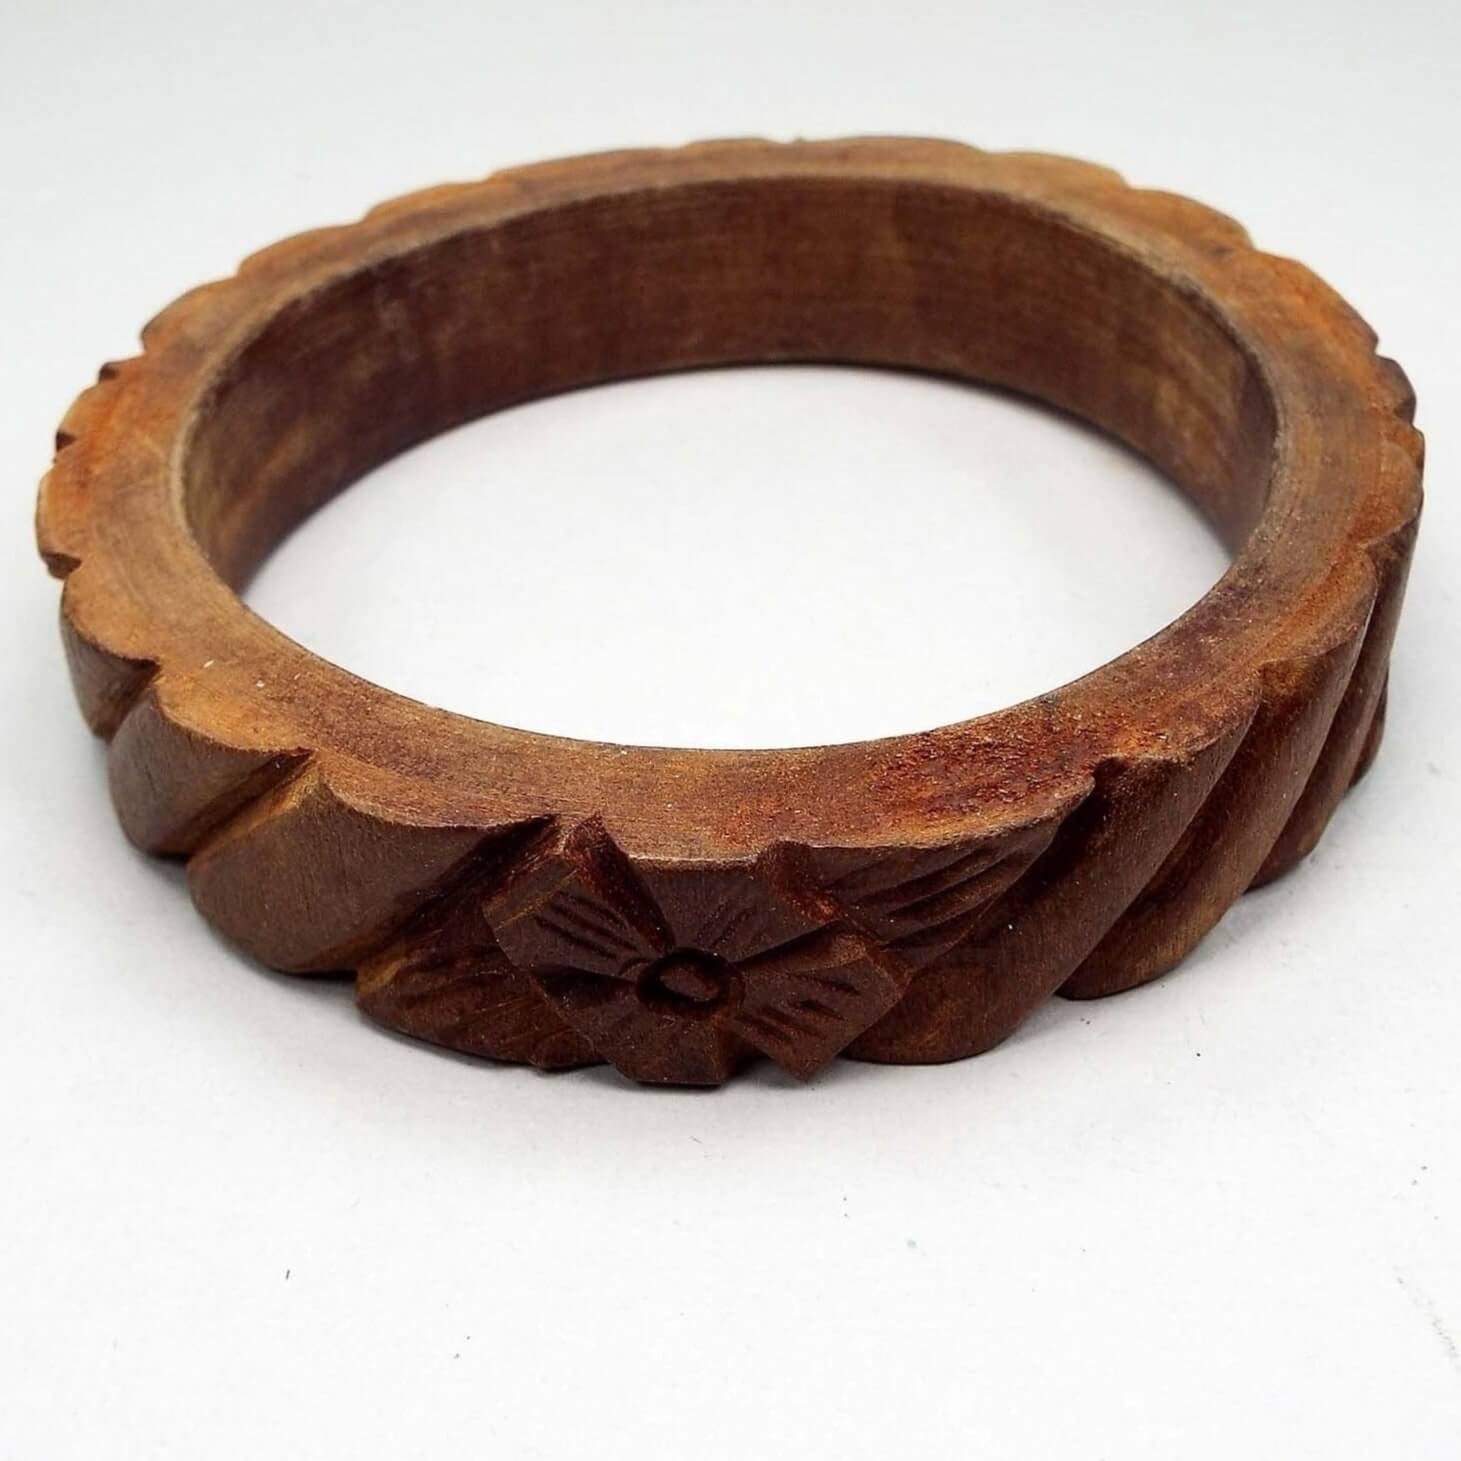 Slightly angled top and side view of the retro vintage wooden bangle bracelet. The wood is dyed brown in color and has rounded carved diagonal stripes all the way around with a carved flower design. The edges and inside of the bangle are flat and smooth.